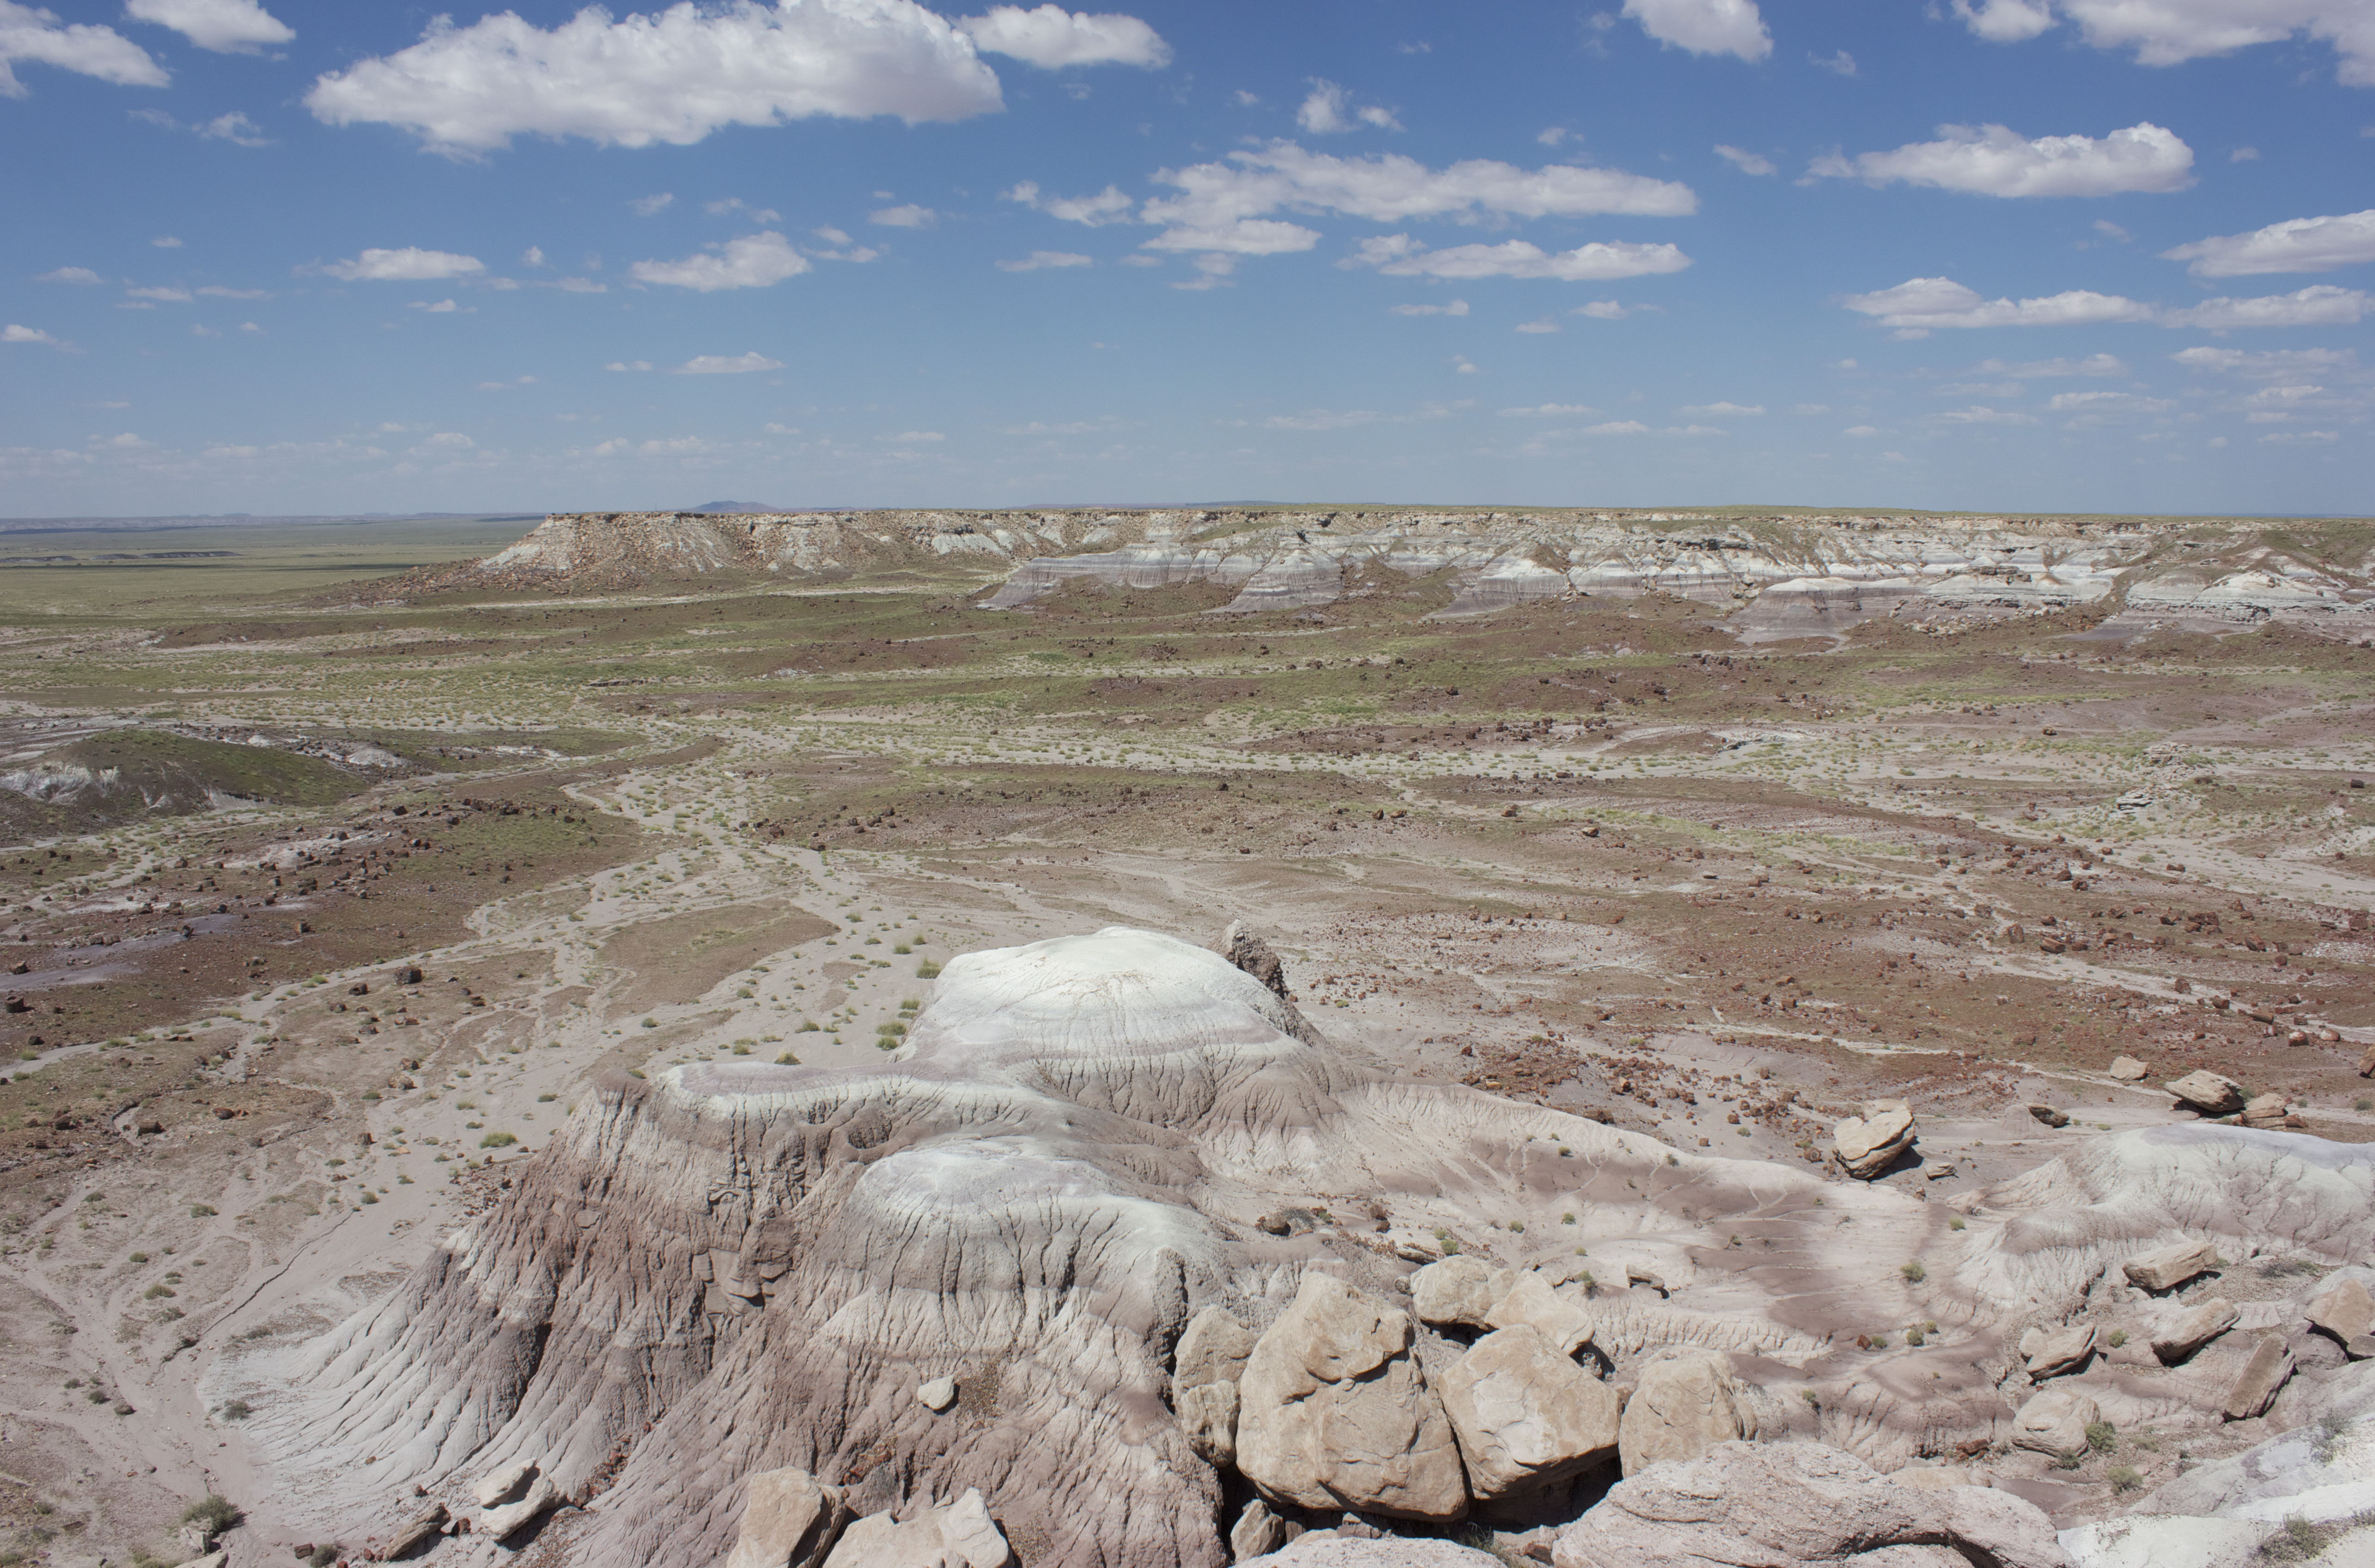 Painted Desert landscape with a cloud-dotted blue sky.